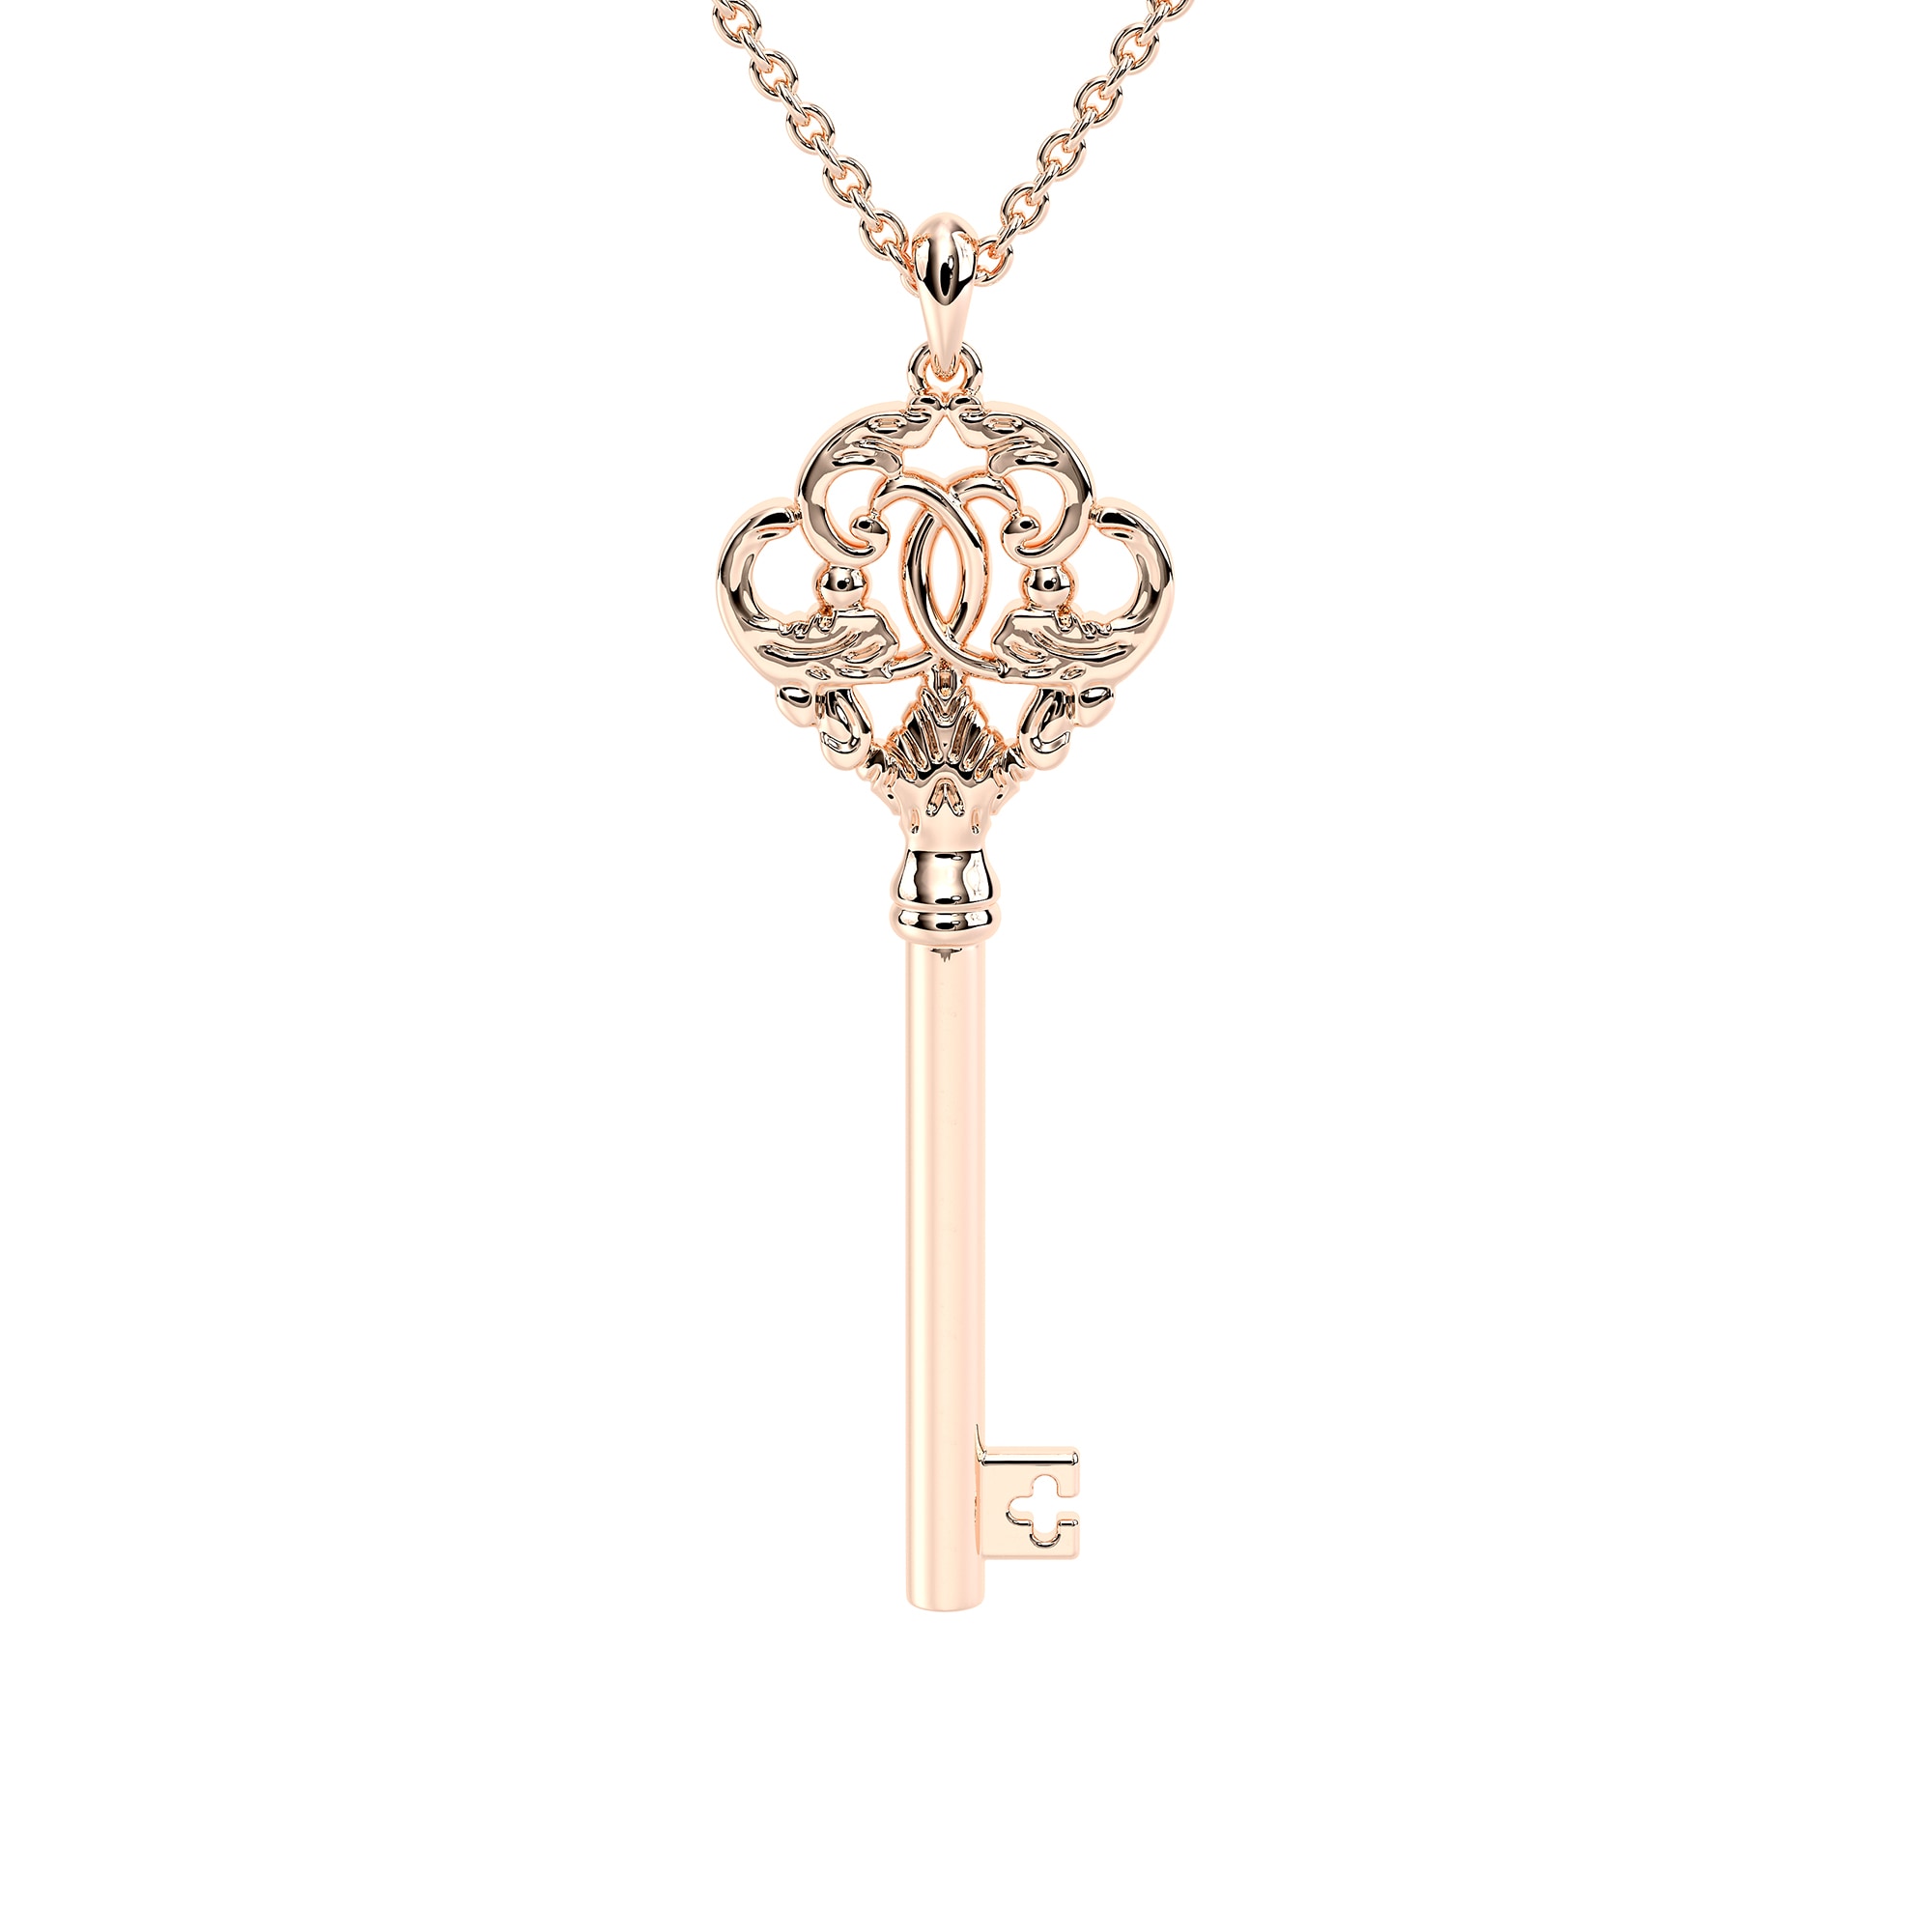 Fancy Key Necklace For Womens Wedding Bridal Jewelry For Her Rose Gold  Heart Key Pendant - Camellia Jewelry